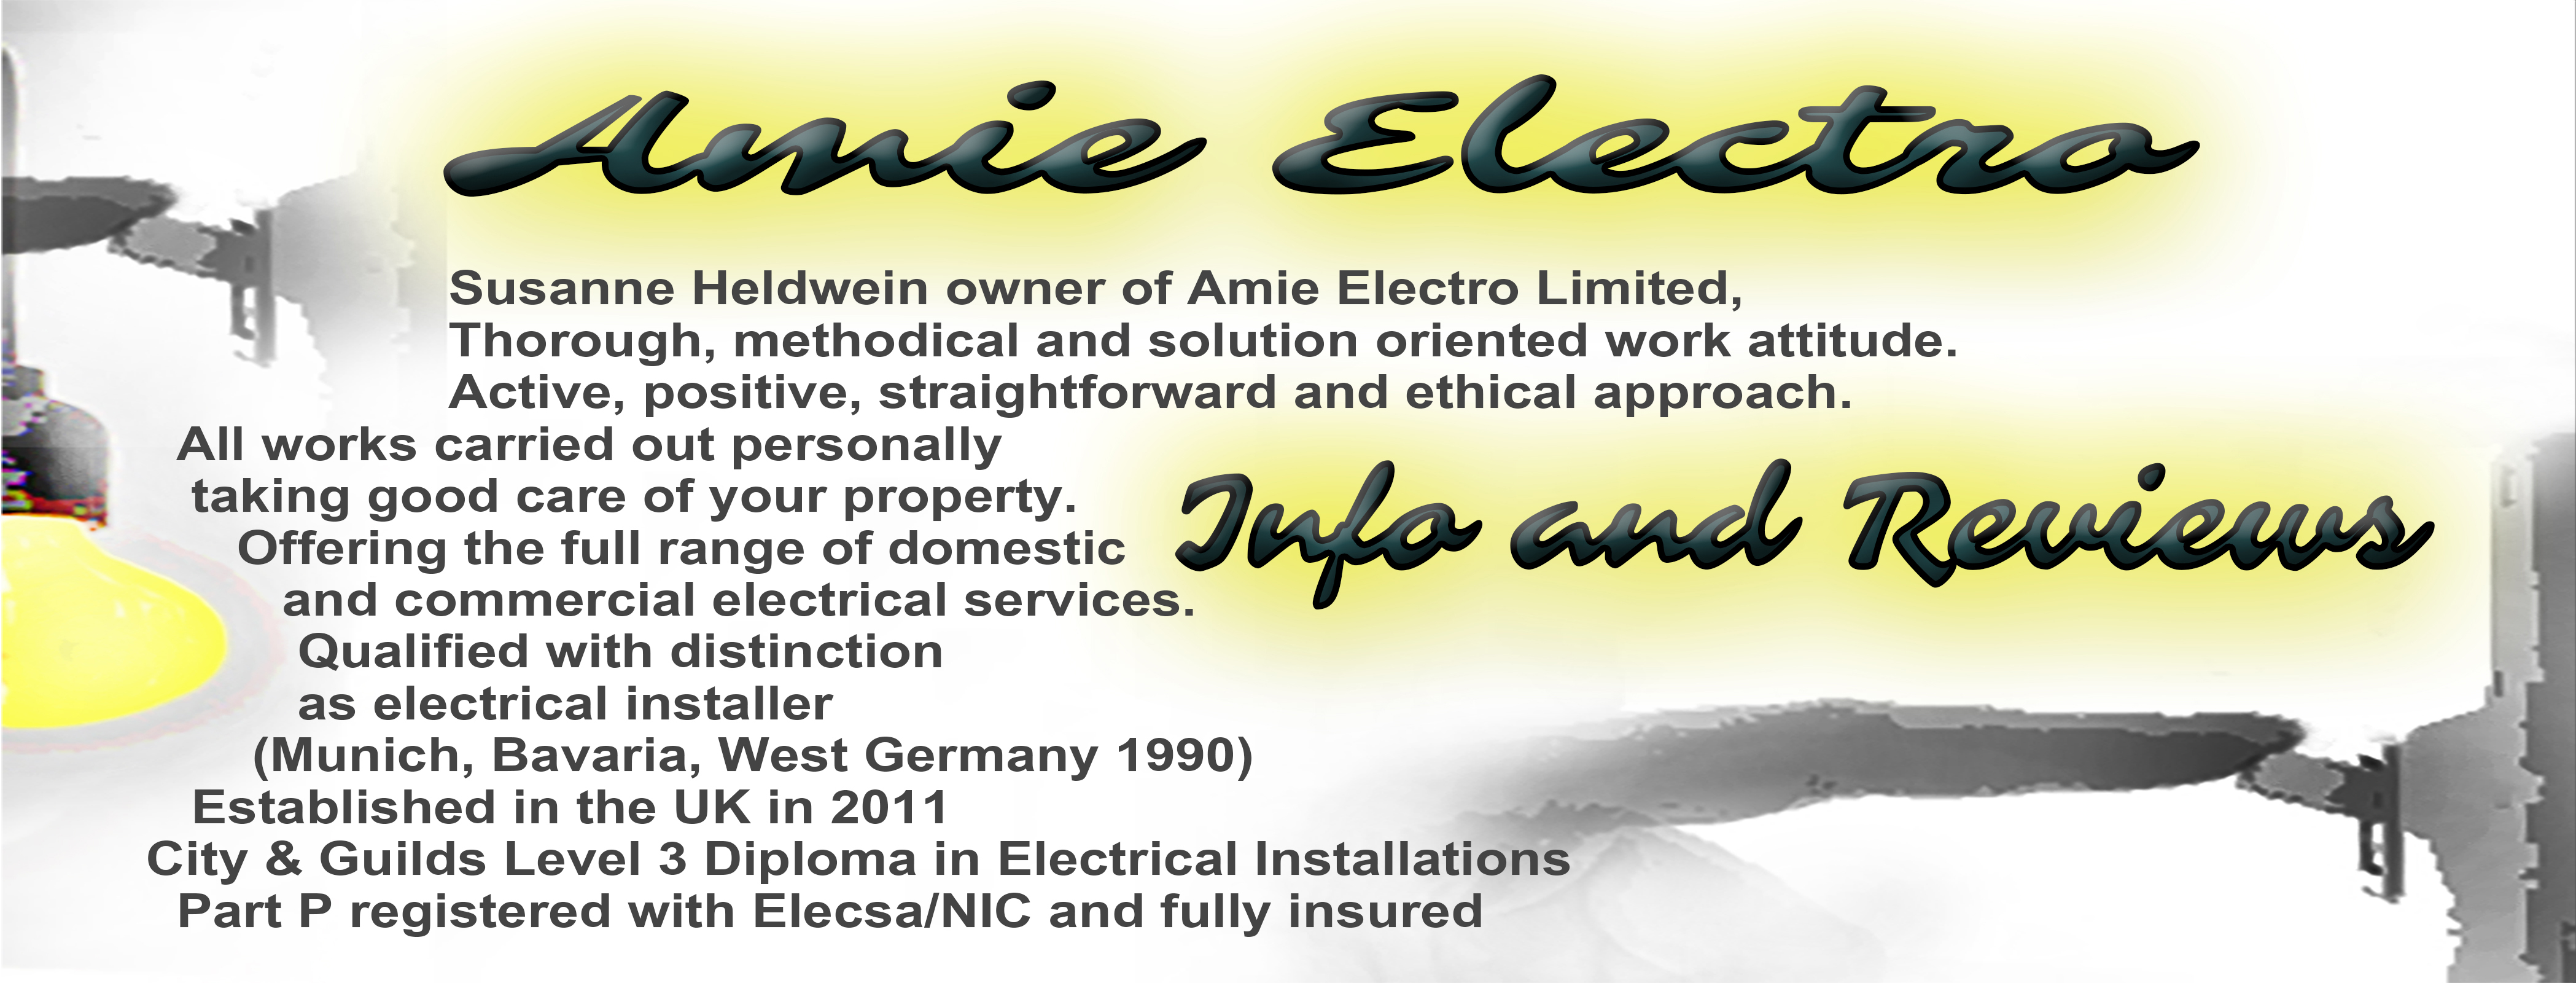 Susanne Heldwein trading as Amie Electro. Thorough, methodical and solution oriented work attitude. Active, positive, straightforward and ethical approach. All works carried out personally taking good care of your property. Offering the full range of domestic and commercial electrical services. Qualified with distinction as electrical installer (Munich, Bavaria, West Germany 1990) Established in the UK in 2011, City & Guilds Level 3 Dimpolma in electrical Installations, Part P registered with Elecsa/NIC and fully insured.